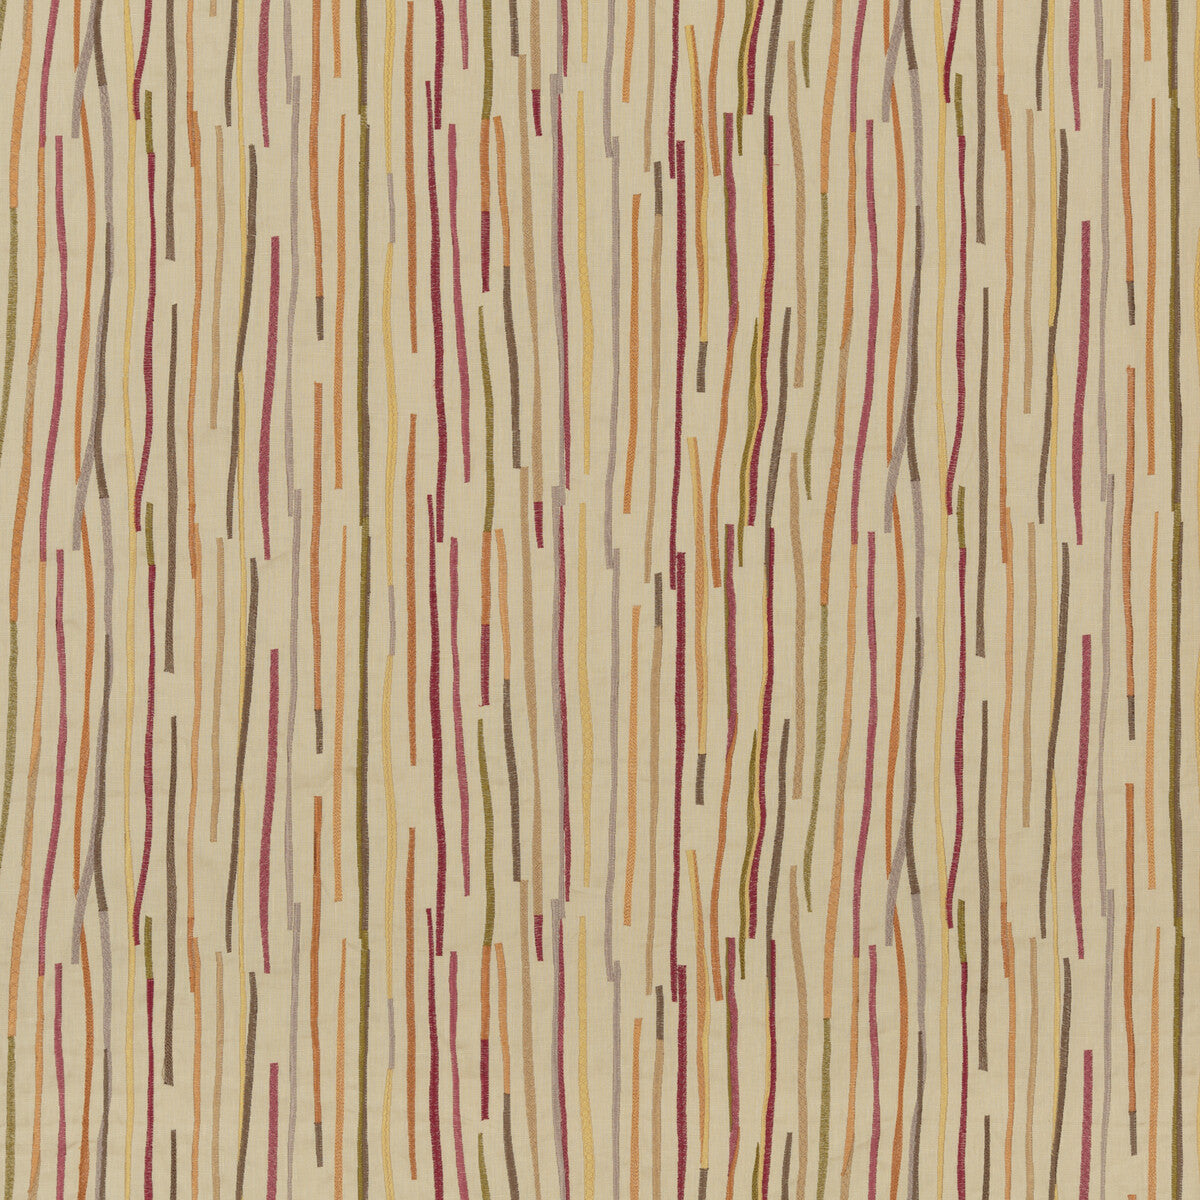 Fiesta Stripe fabric in red/sienna color - pattern FD769.V165.0 - by Mulberry in the Festival collection